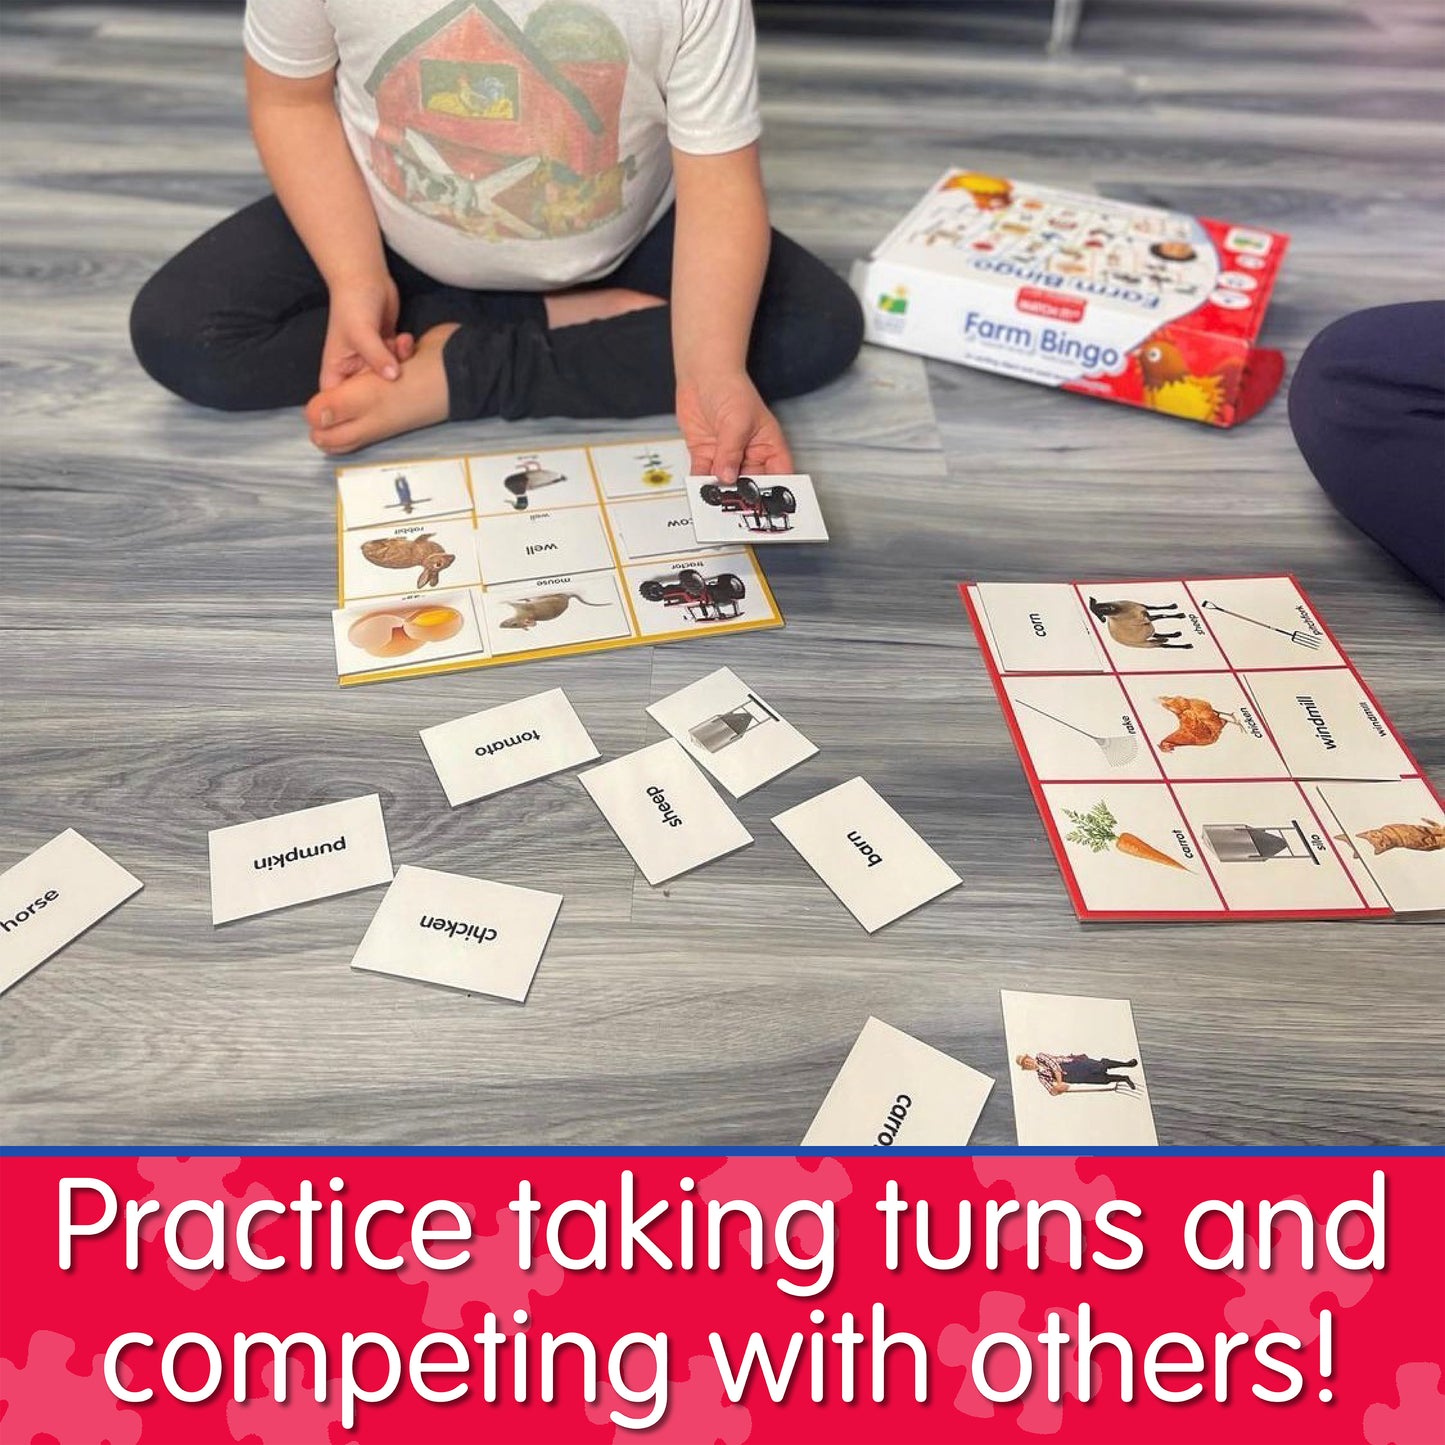 Infographic of little girl playing Match It - Farm Bingo that says, "Practice taking turns and competing with others!"